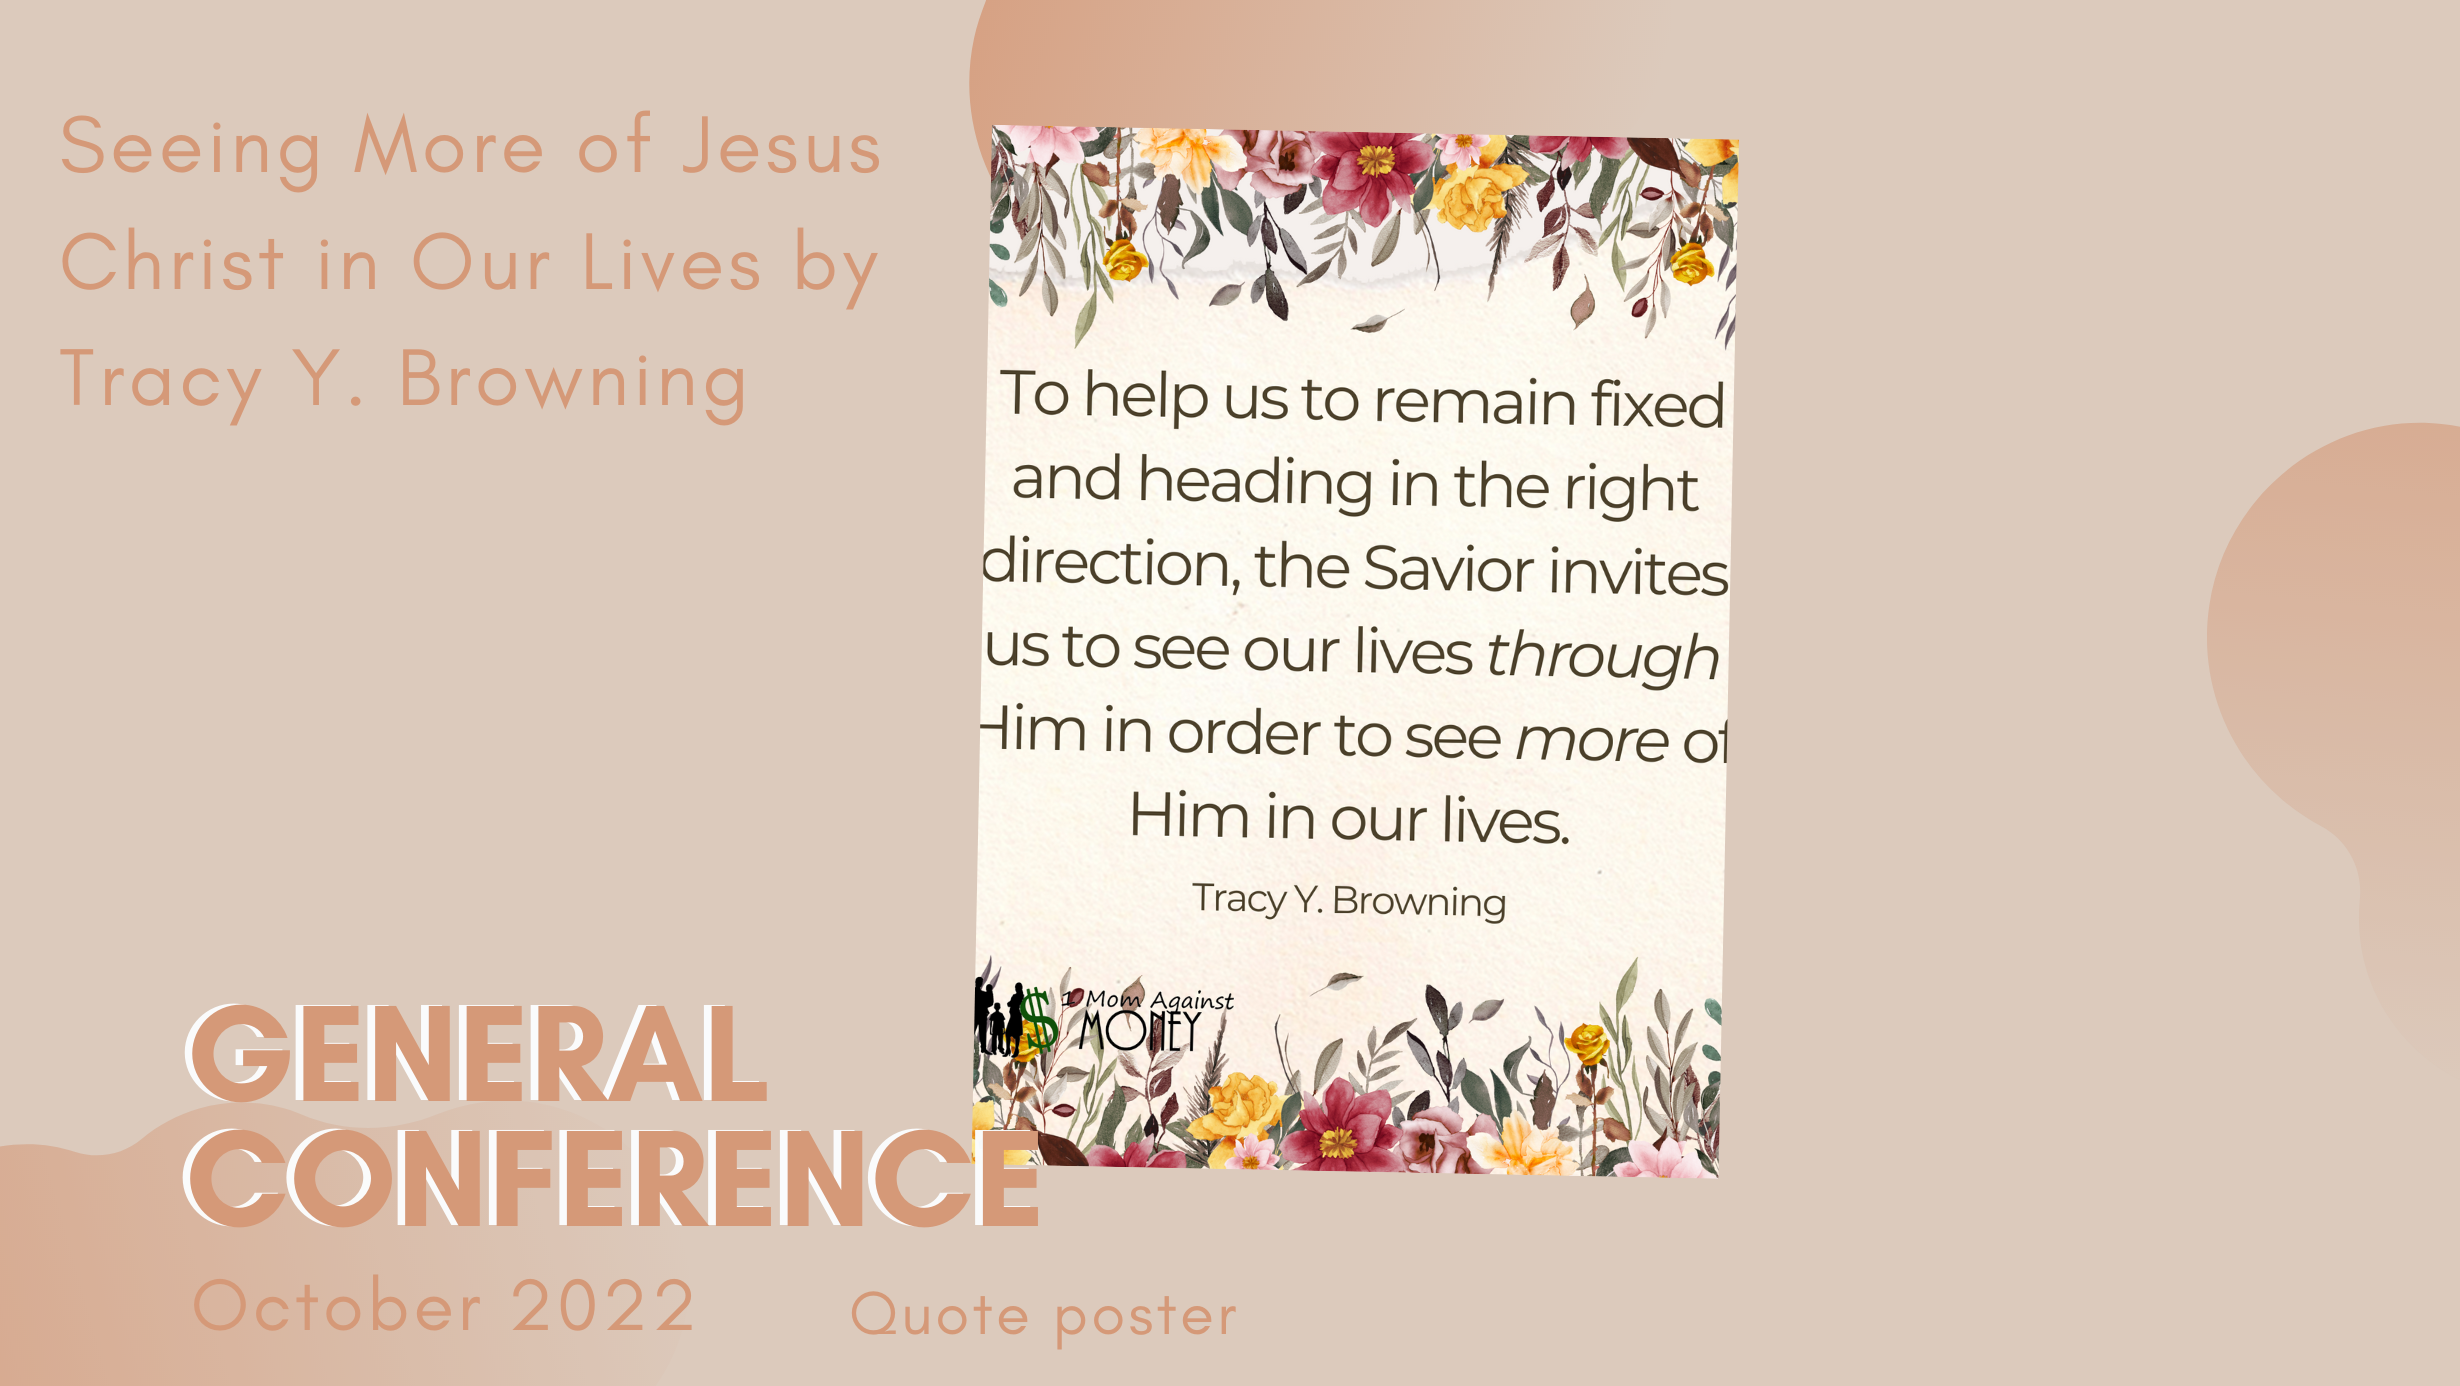 October 2022: General Conference Quote Poster Seeing More of Jesus Christ in Our Lives